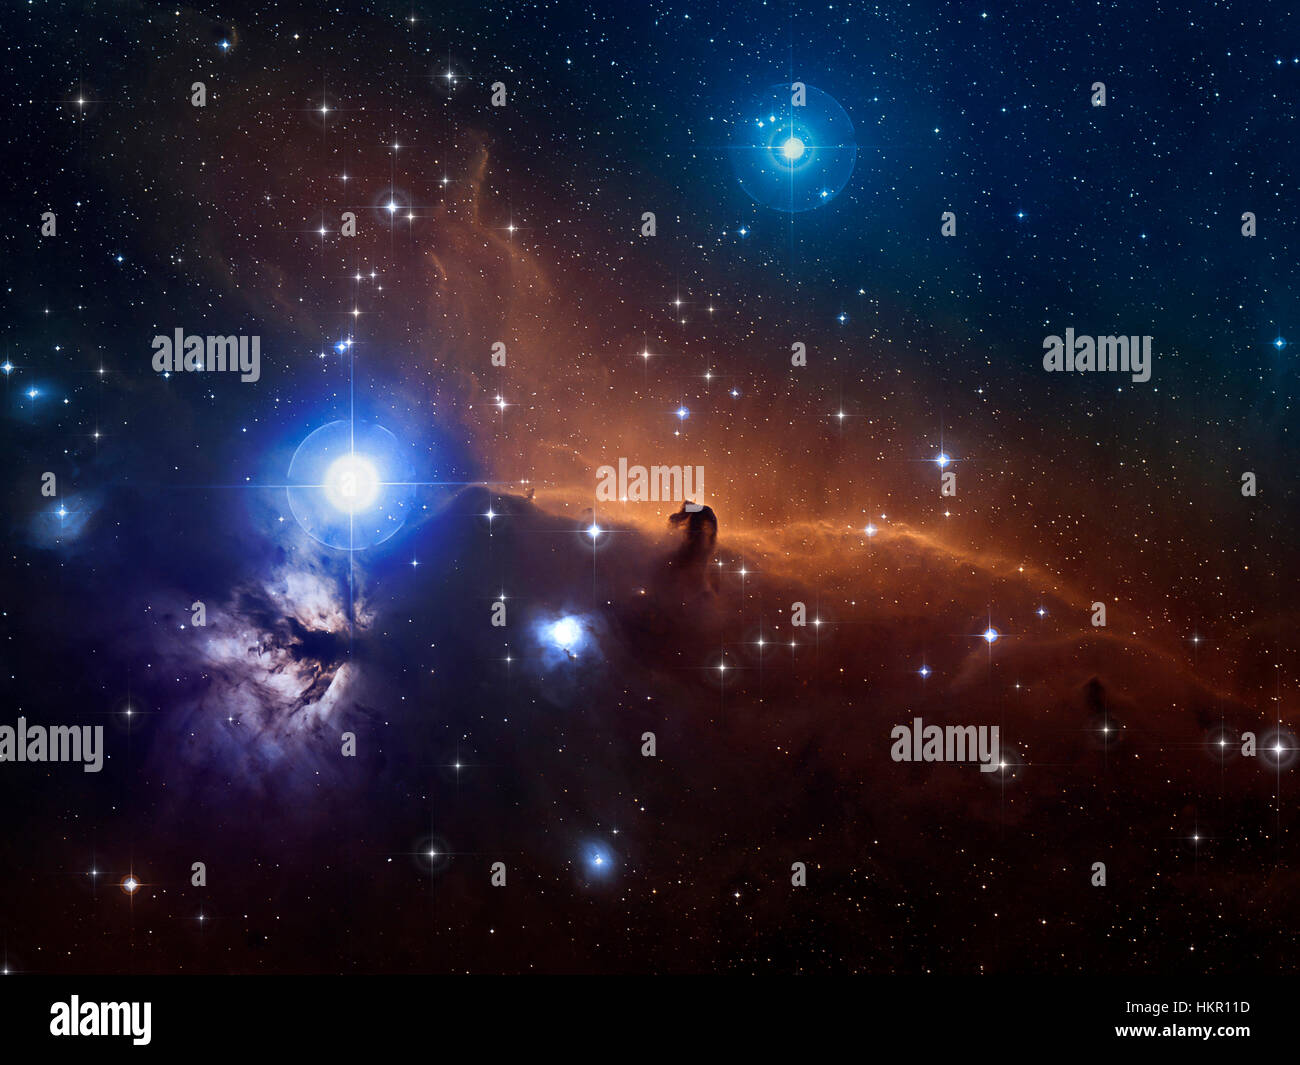 Horsehead nebula in the background of starry sky. Some image elements furnished by NASA. Stock Photo